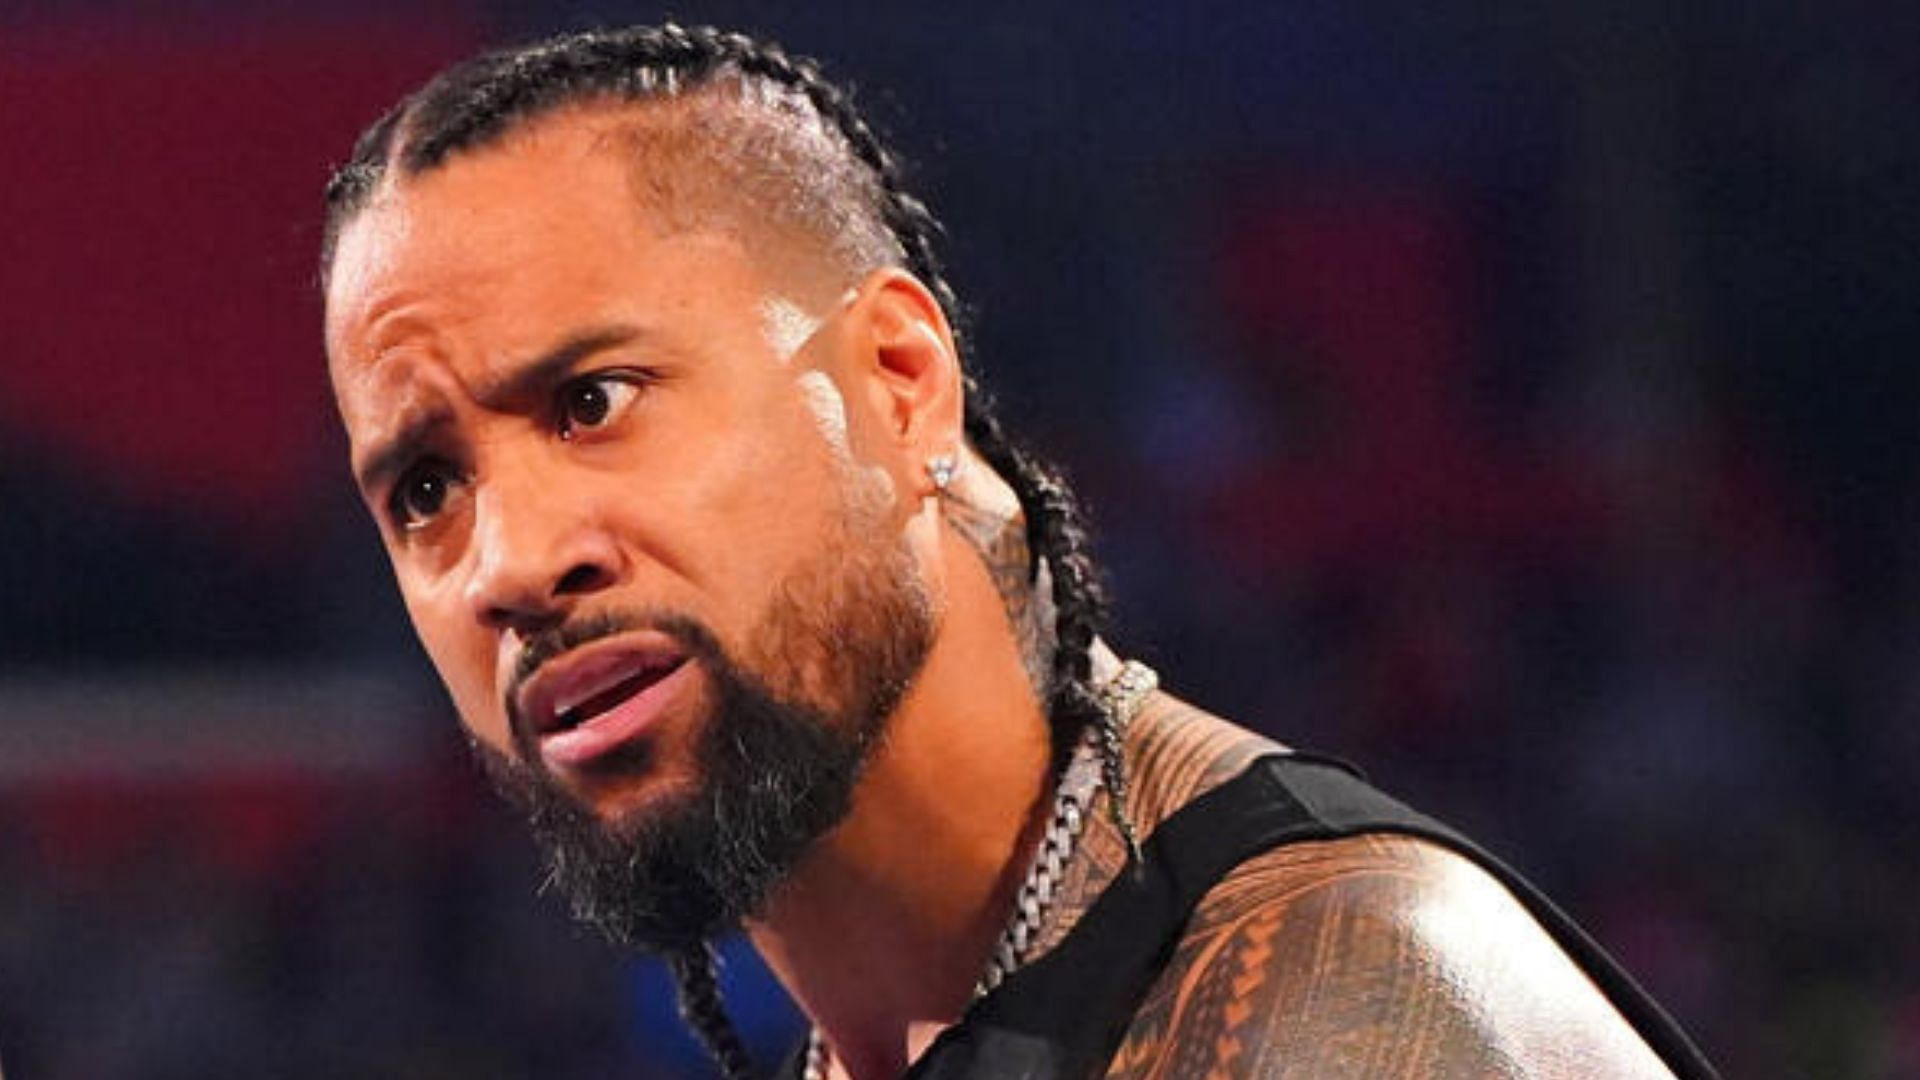 Jimmy Uso is an 8-time champion in WWE.